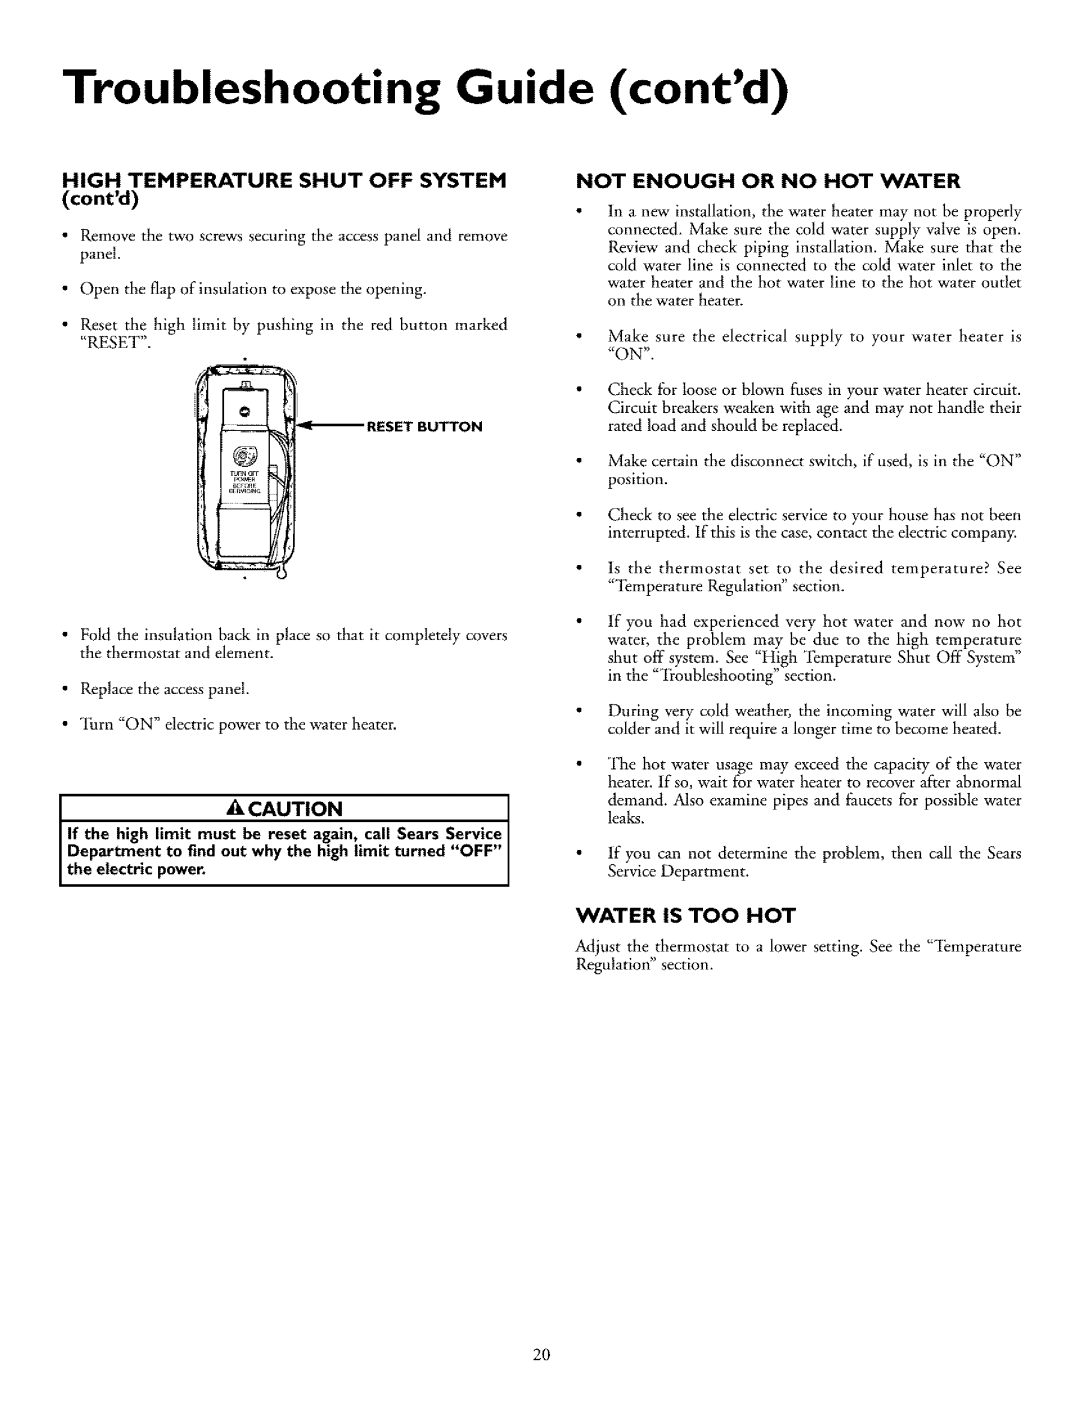 Kenmore 153.31702 Troubleshooting Guide contd, Not Enough Or No Hot Water, Cautionj, Water Is Too Hot, the e ectr c power 